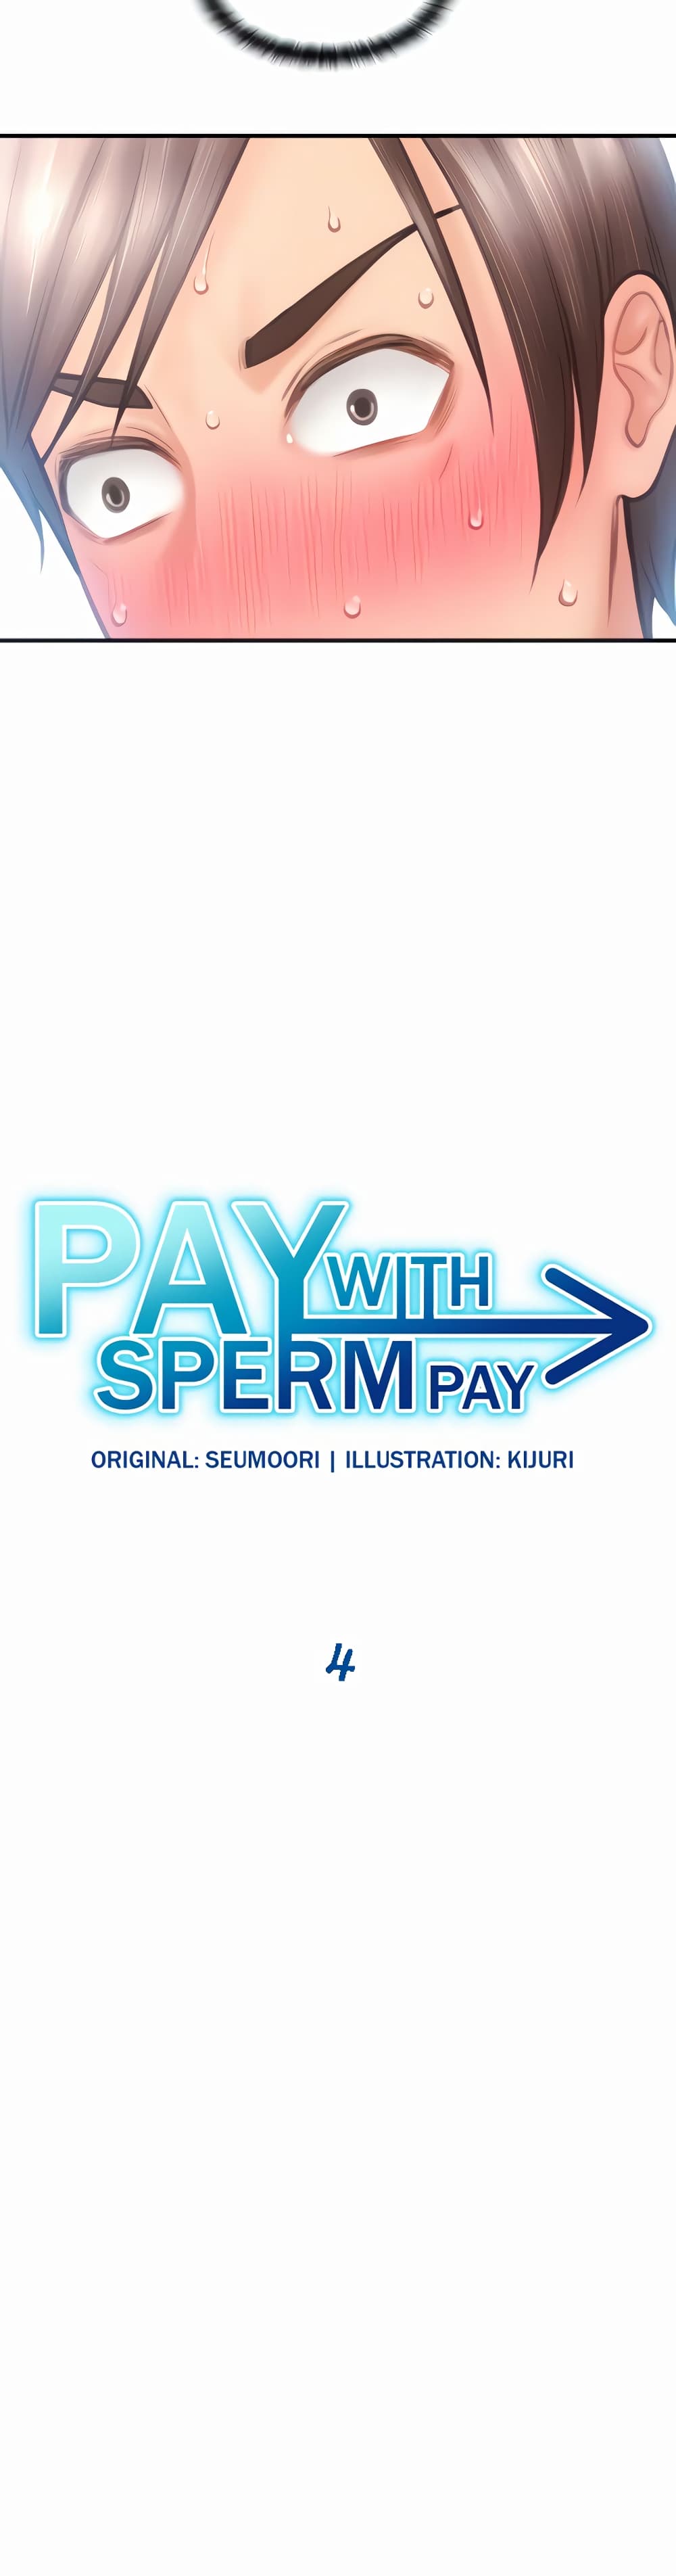 Pay with Sperm Pay 4 (5)